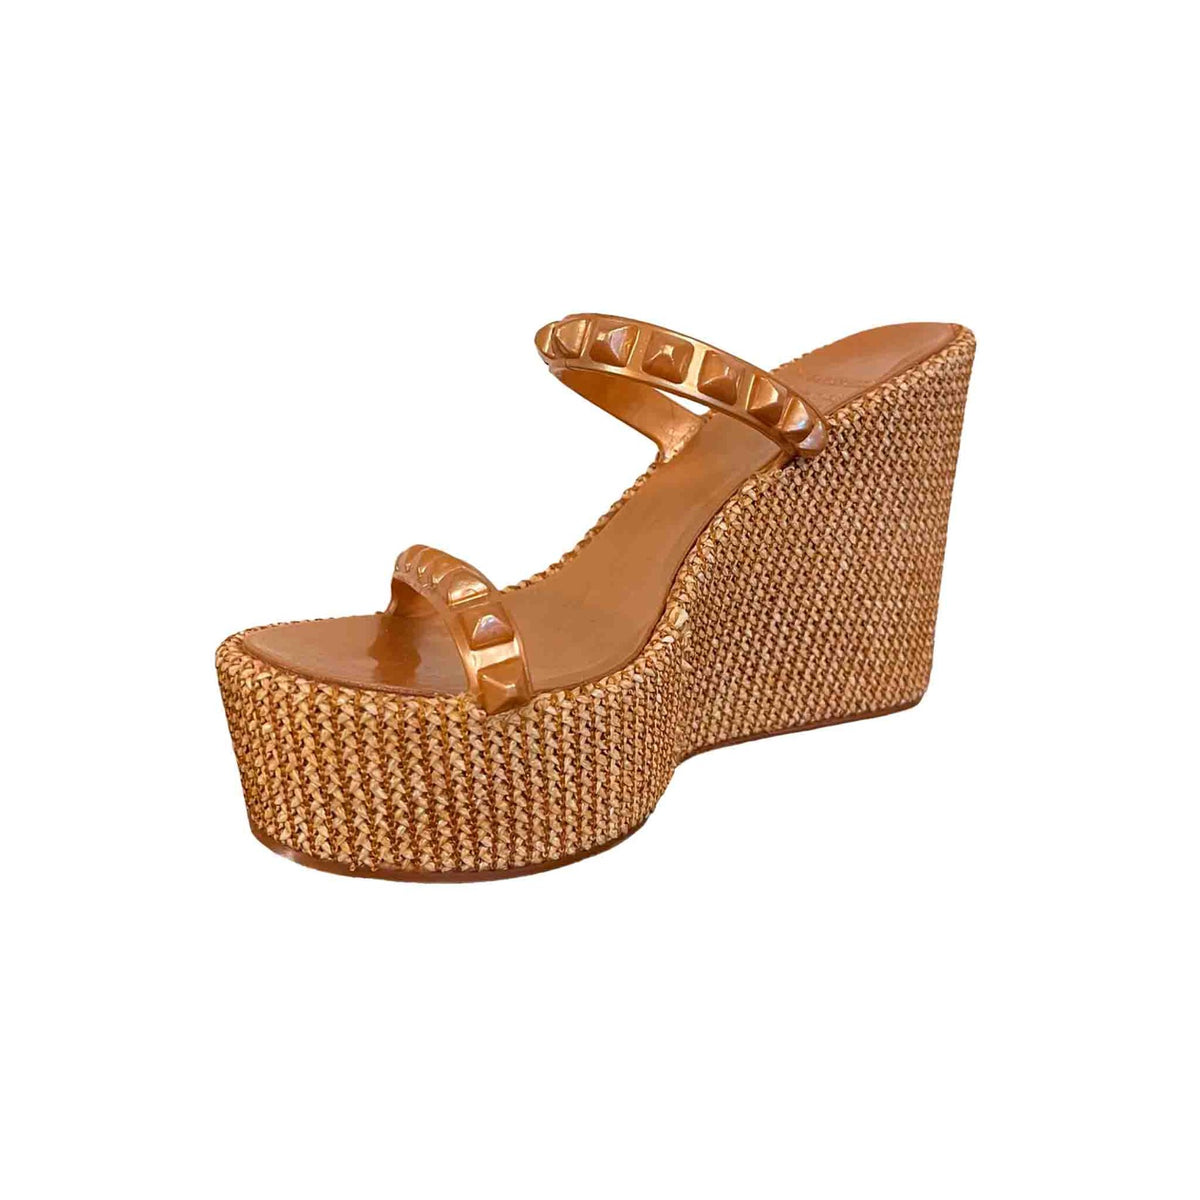 Rose Gold in Color Tonino Raffia High Wedges, featuring a tropical-inspired design that complements beachwear beautifully.